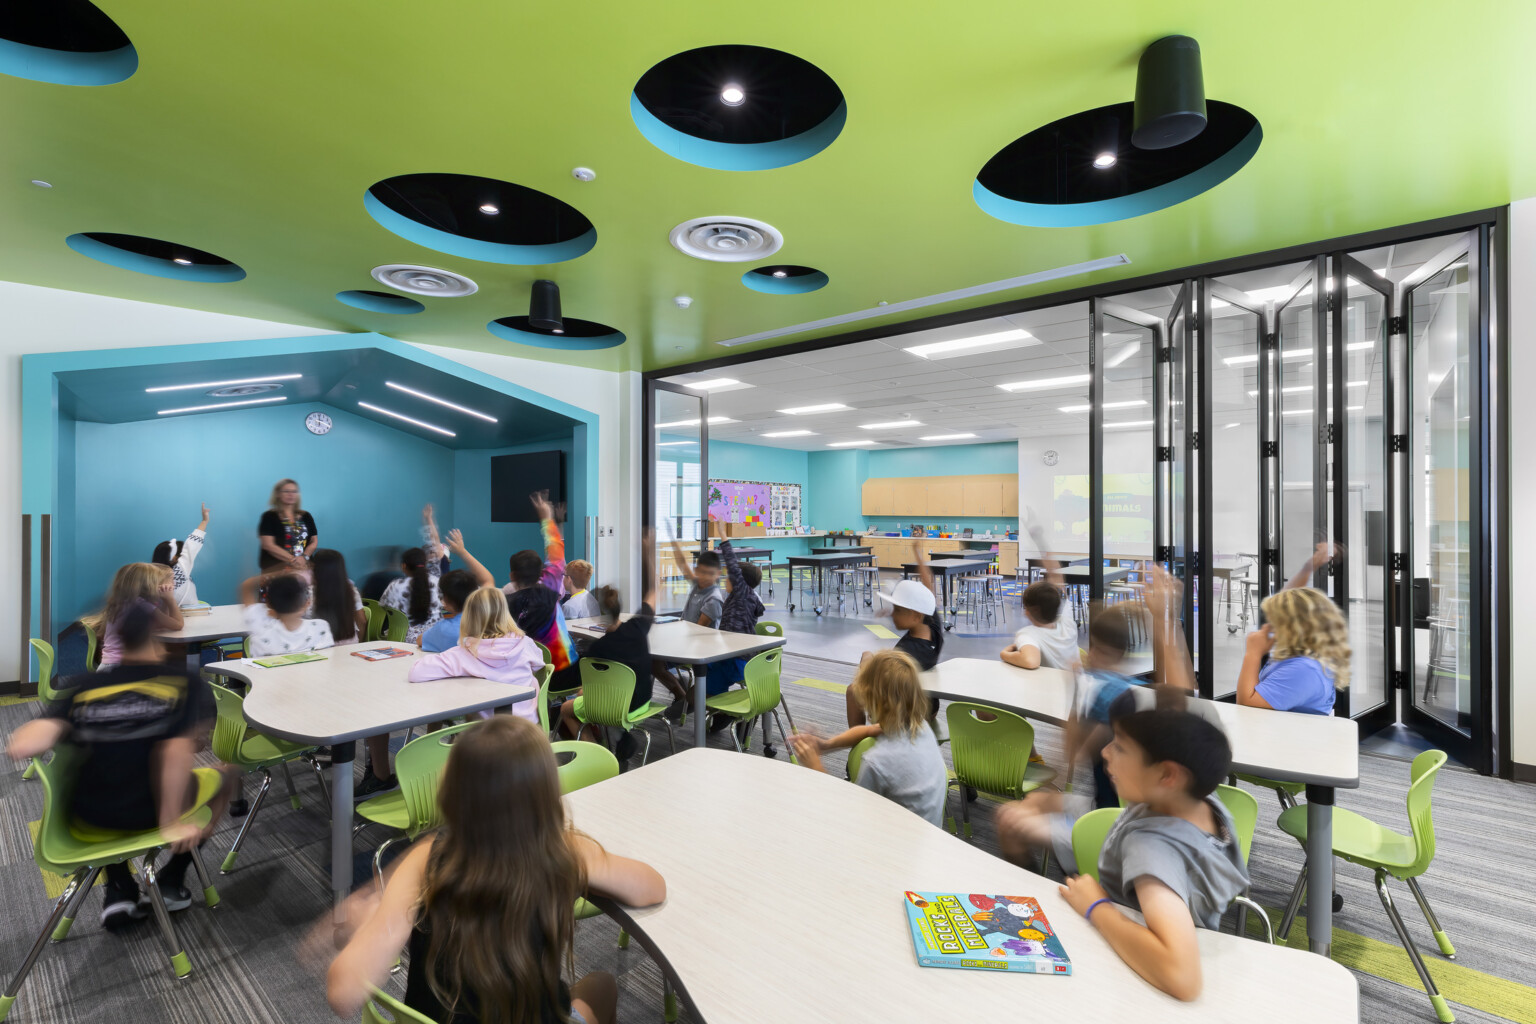 Flexible learning space with collapsible glass walls, green ceiling with blue accents, dimensional recessed lights